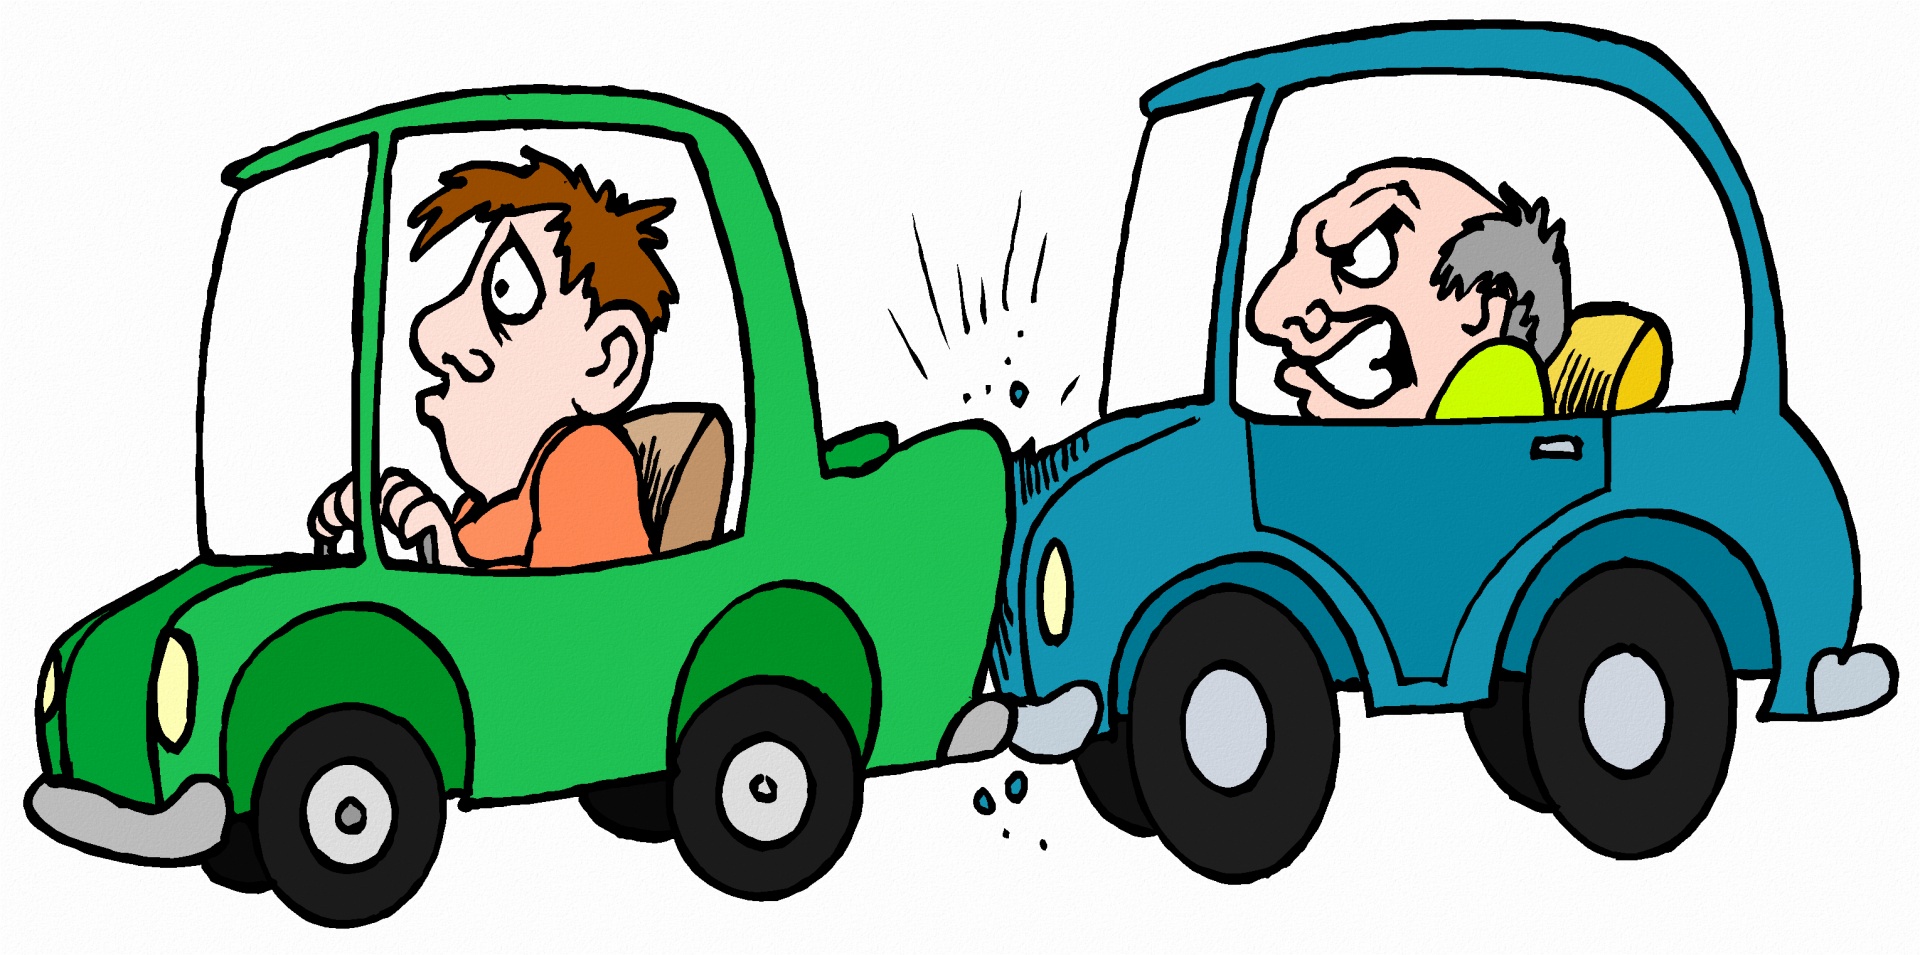 Accident,car,collision,laugh,fun - free image from 